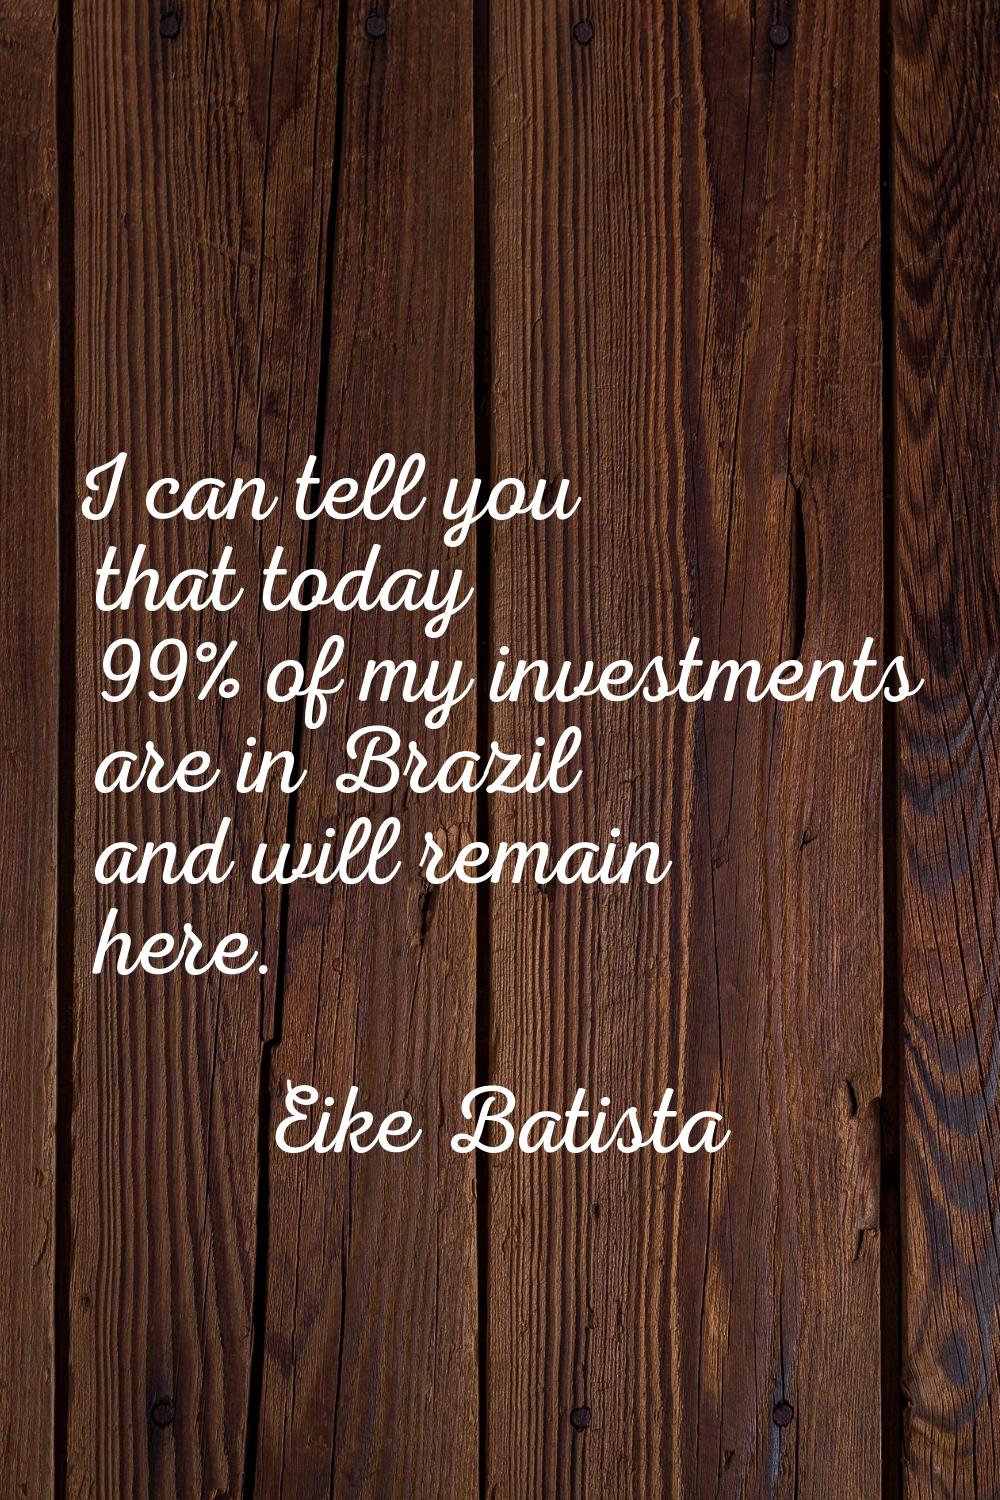 I can tell you that today 99% of my investments are in Brazil and will remain here.